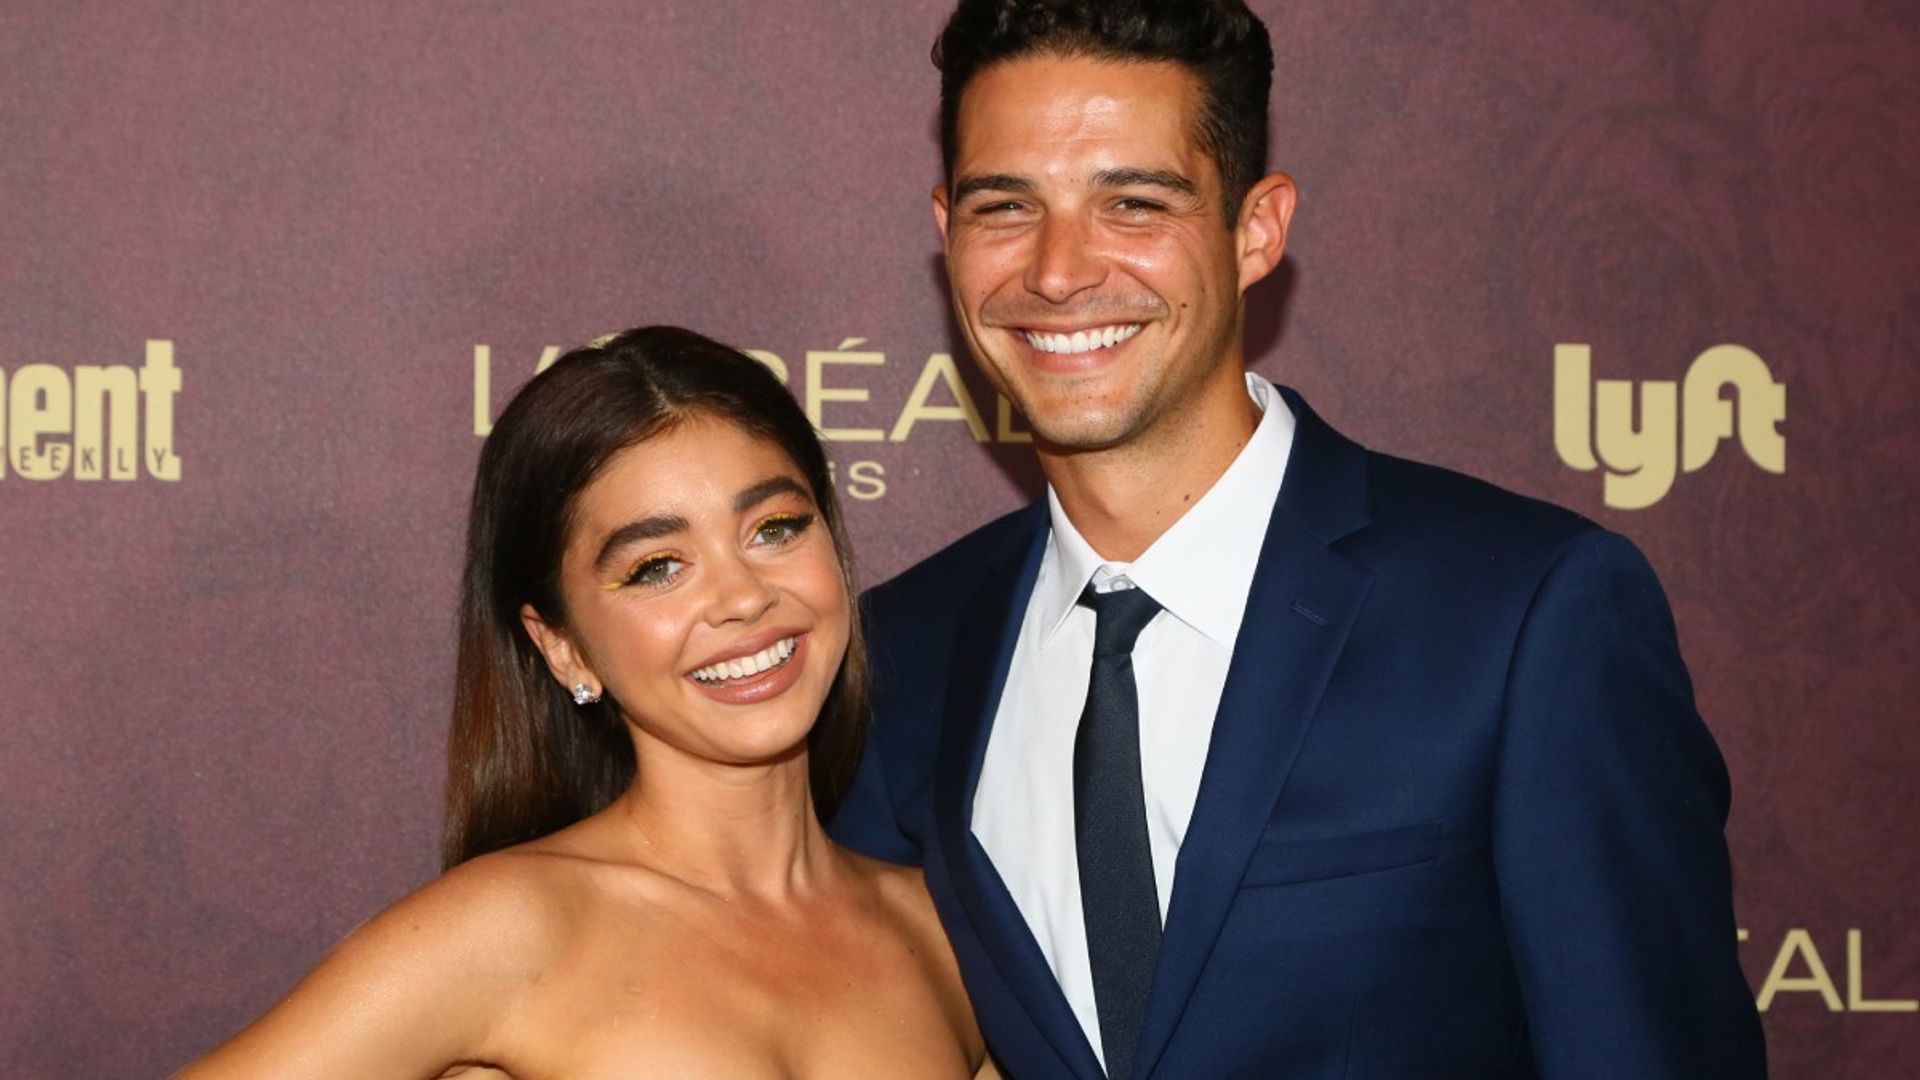 Modern Family's Sarah Hyland 'so excited' to celebrate incredible Bachelor news